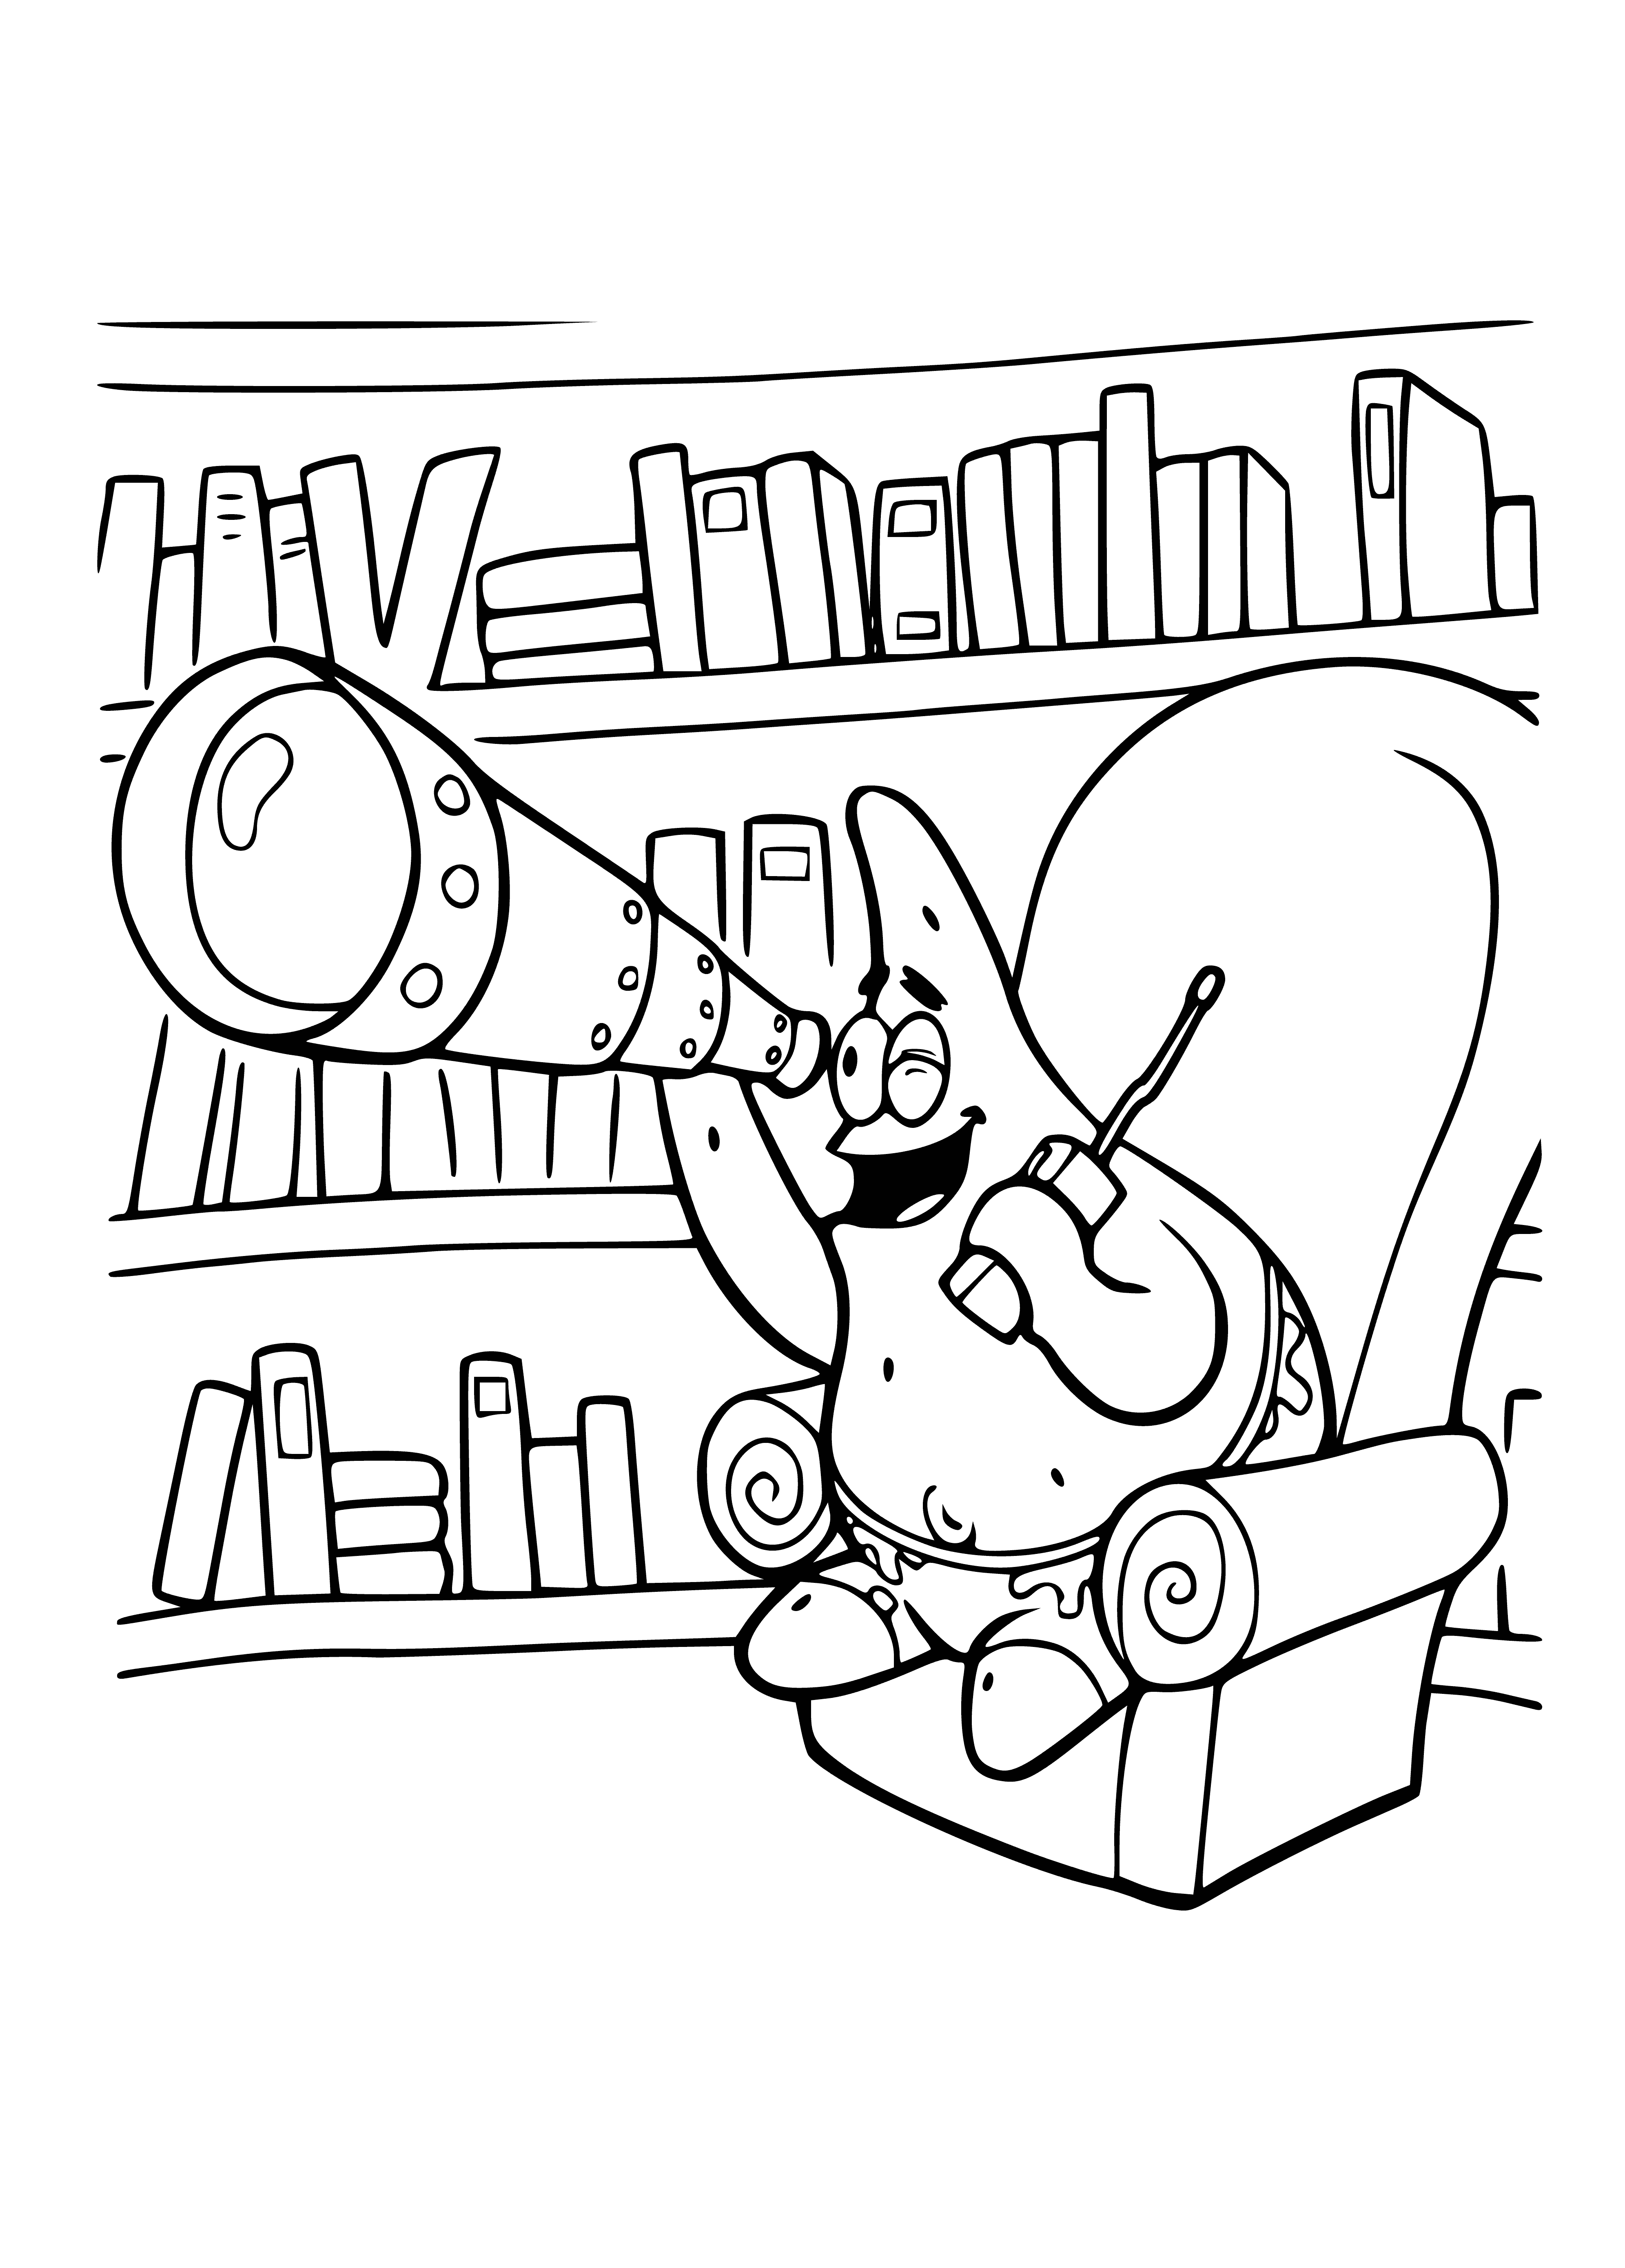 coloring page: Sleeping Patrick wearing a blue shirt and white pants, with yellow shoes, is in a red chair.